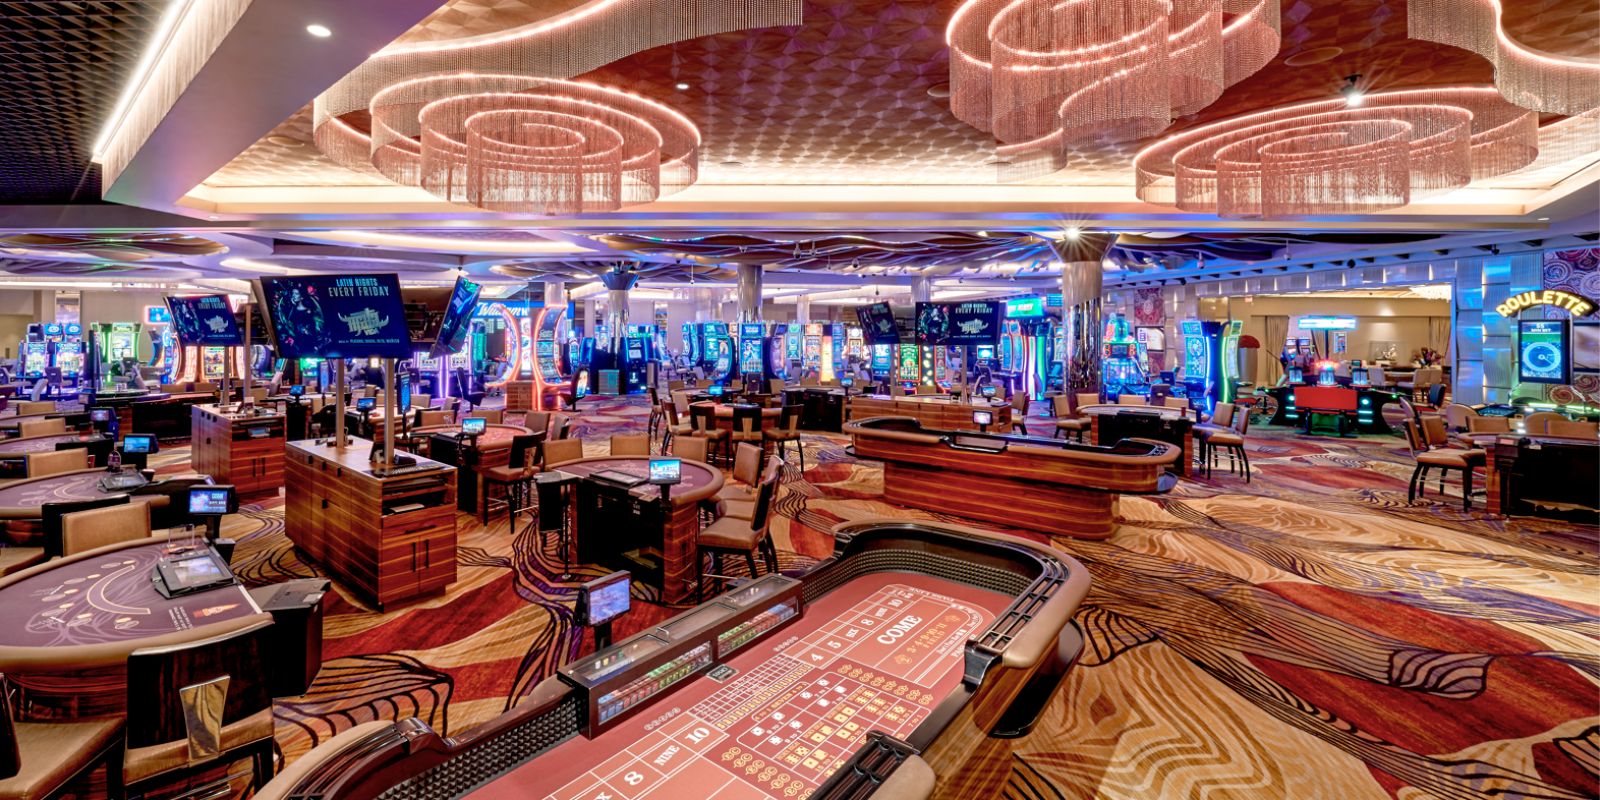 A picture of the casino floor